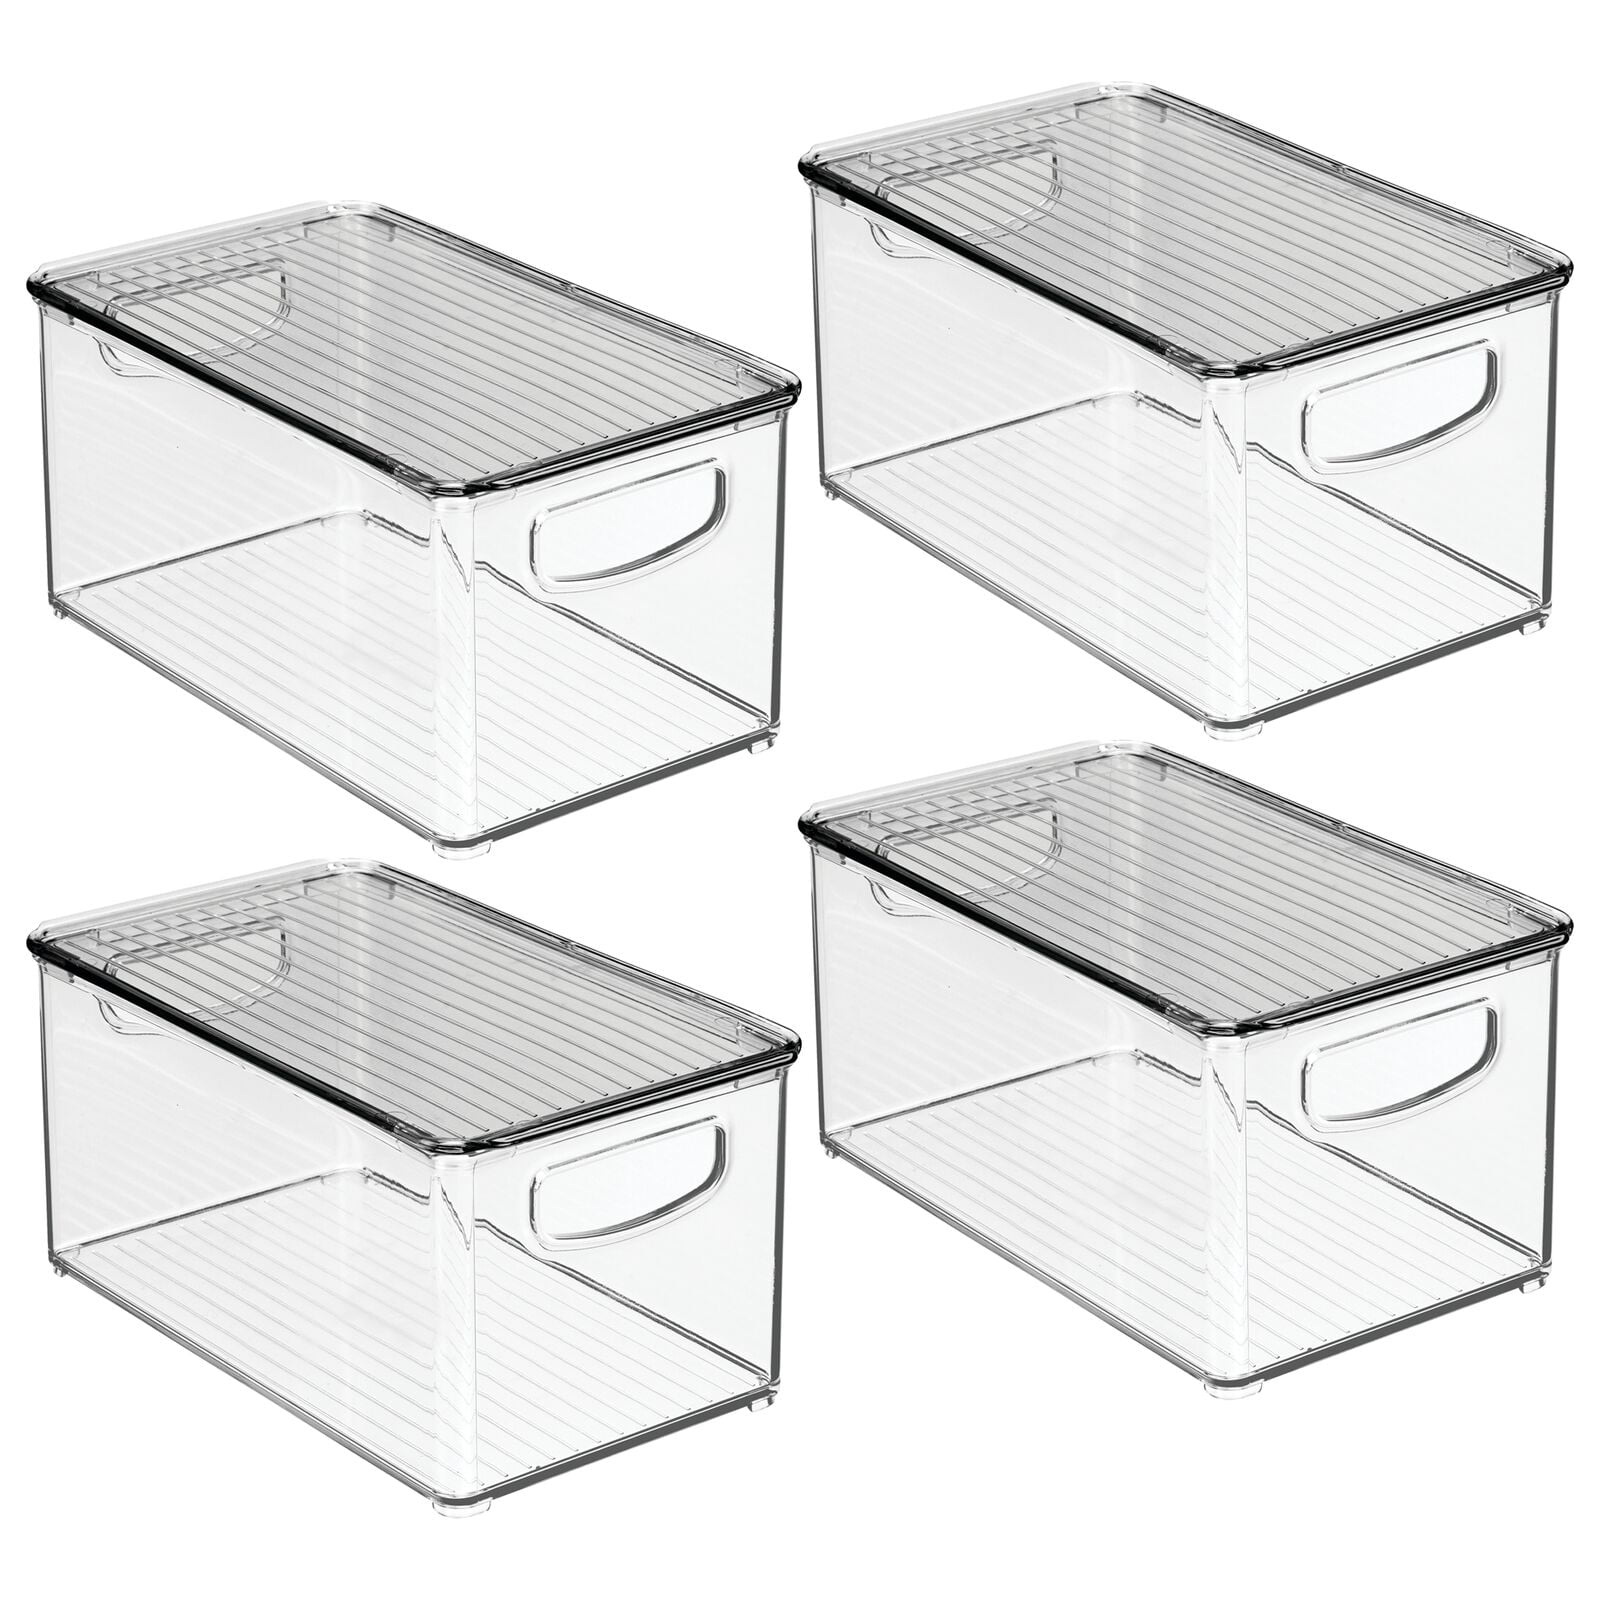 Clear/Smoke Lid for Home Office Workspace mDesign Plastic Storage Bin 2 Pack 